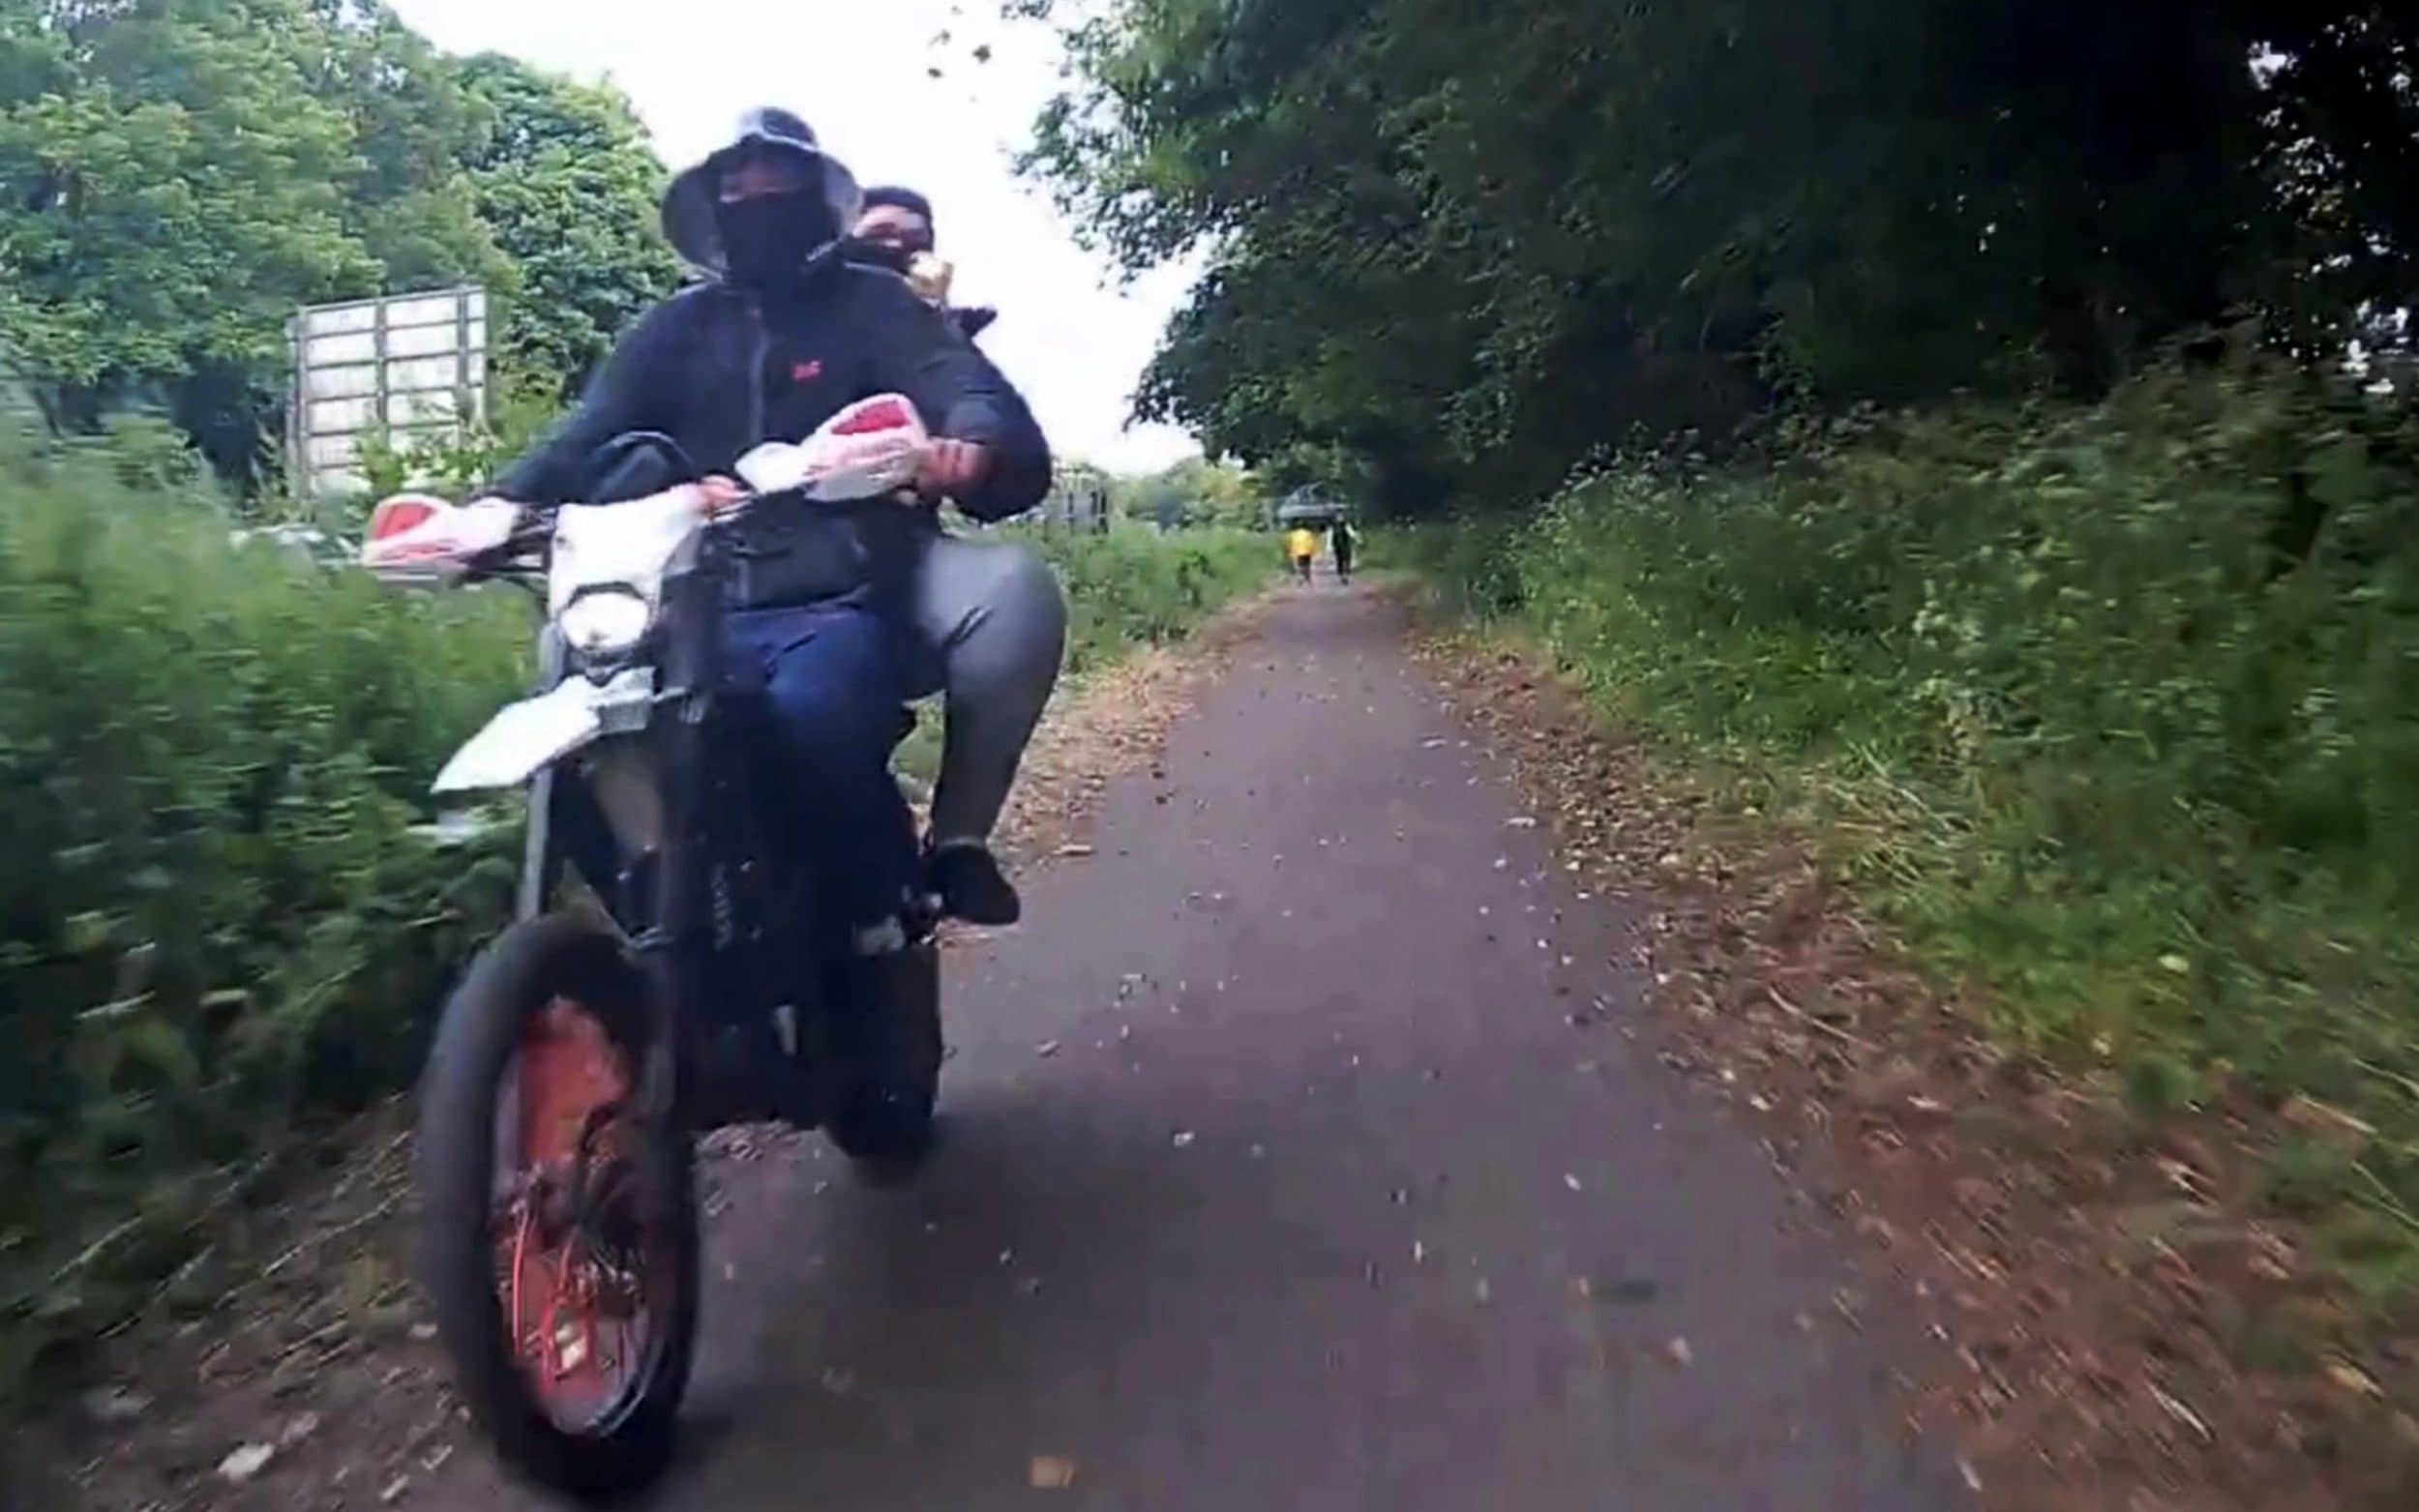 Watch: Cyclist seriously injured after passing biker kicks him to ground